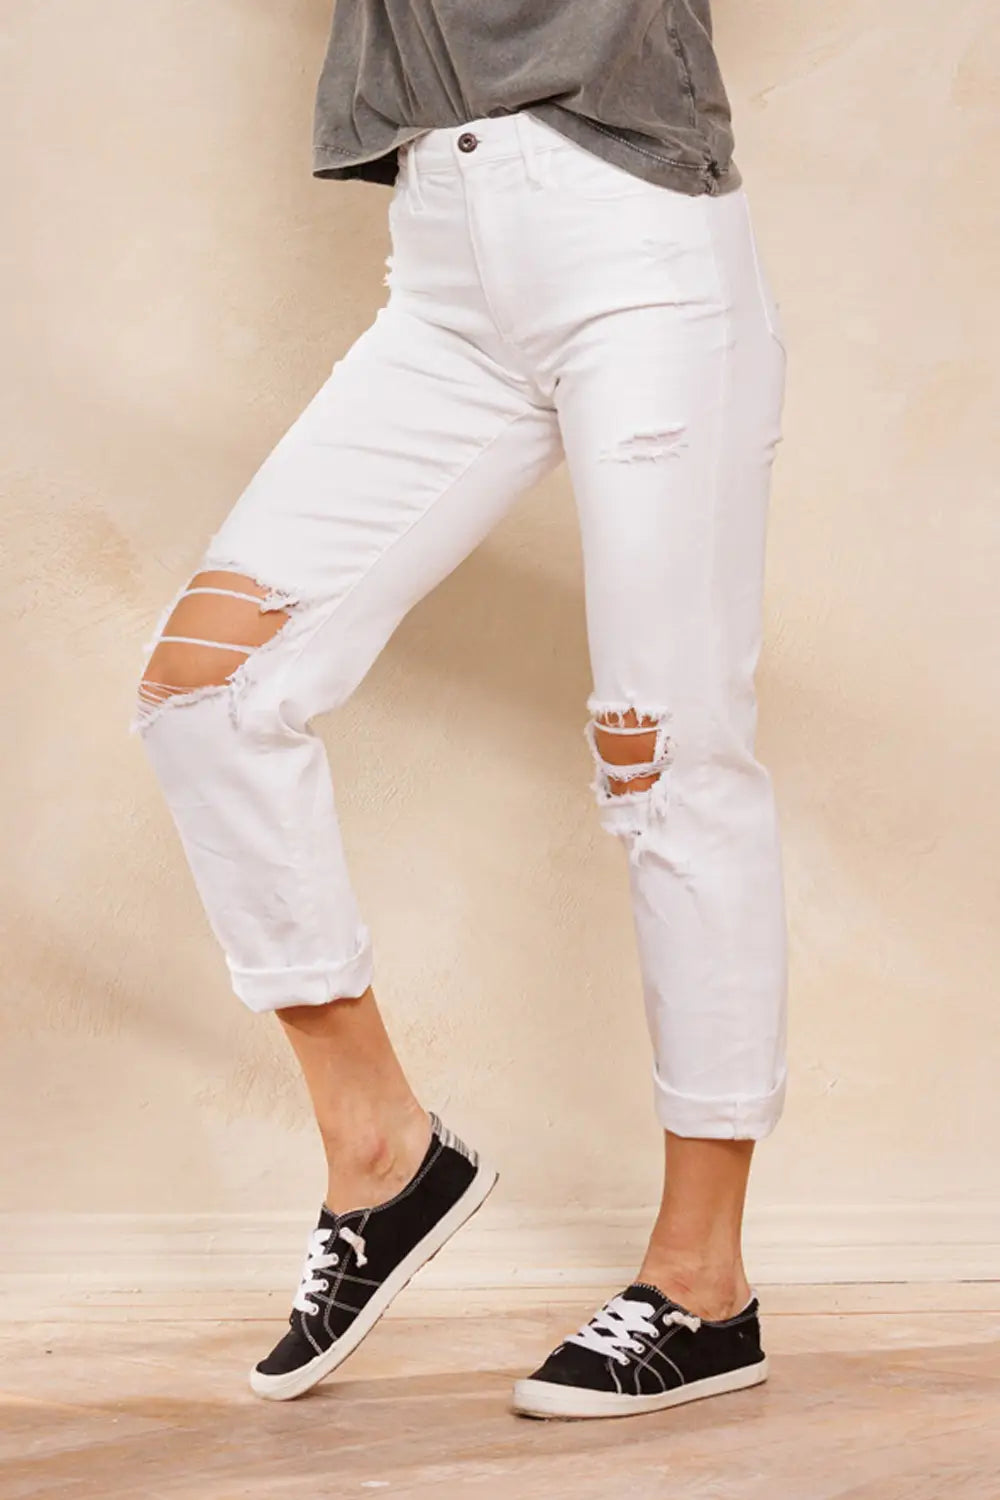 Orient redde Springboard Buy 90's Skinny White Jeans with Distressed Knees Online | Sissy Boutique